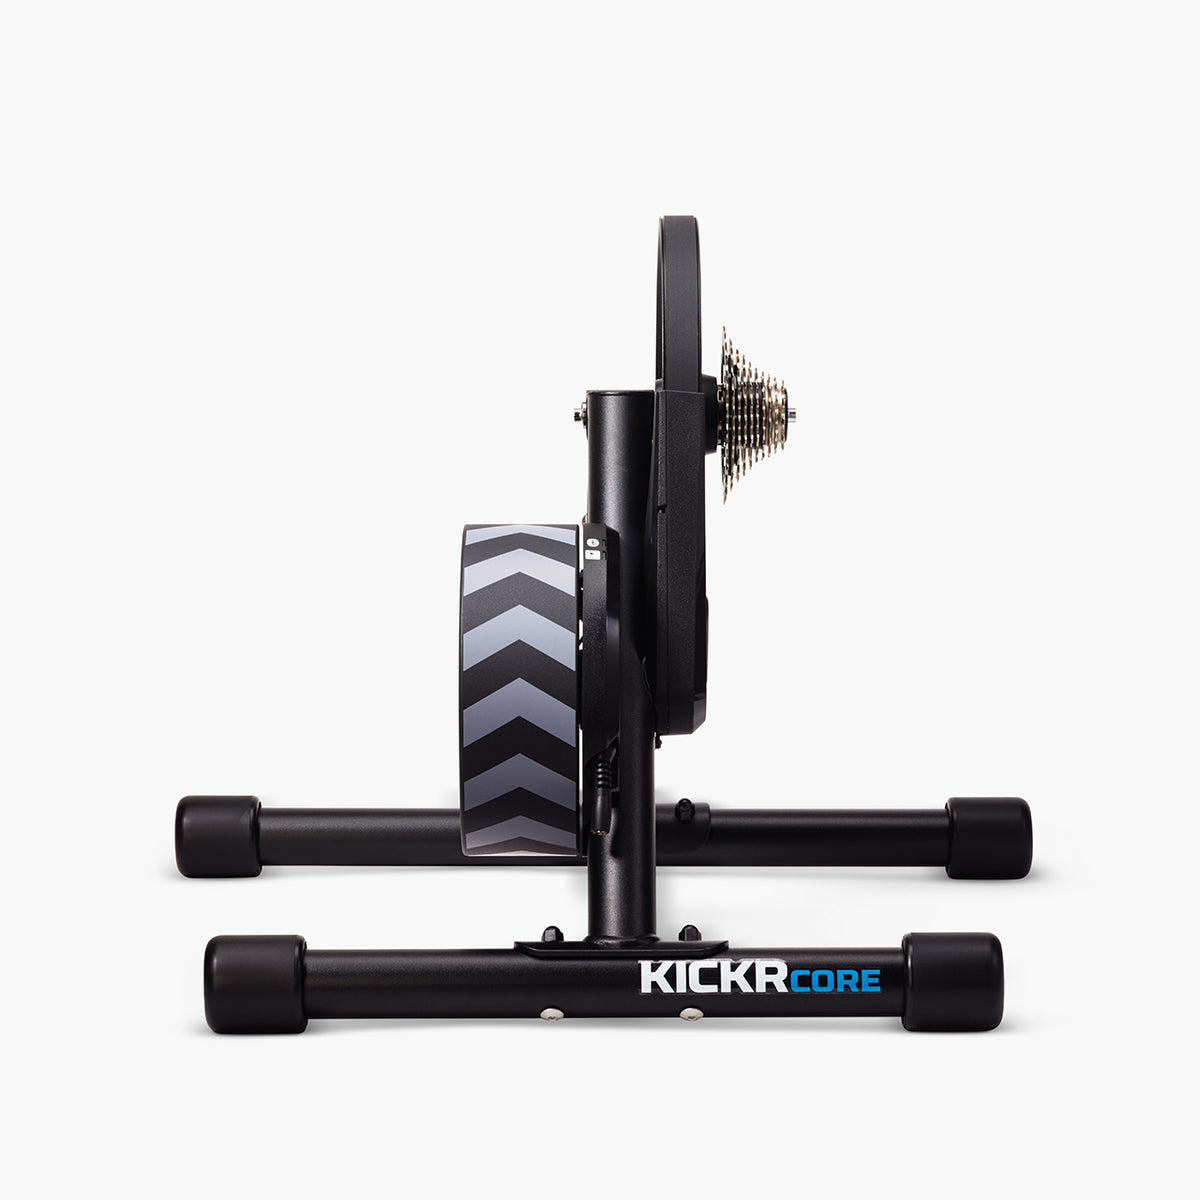 Wahoo KICKR CORE Zwift compatible with 10-speed cassette